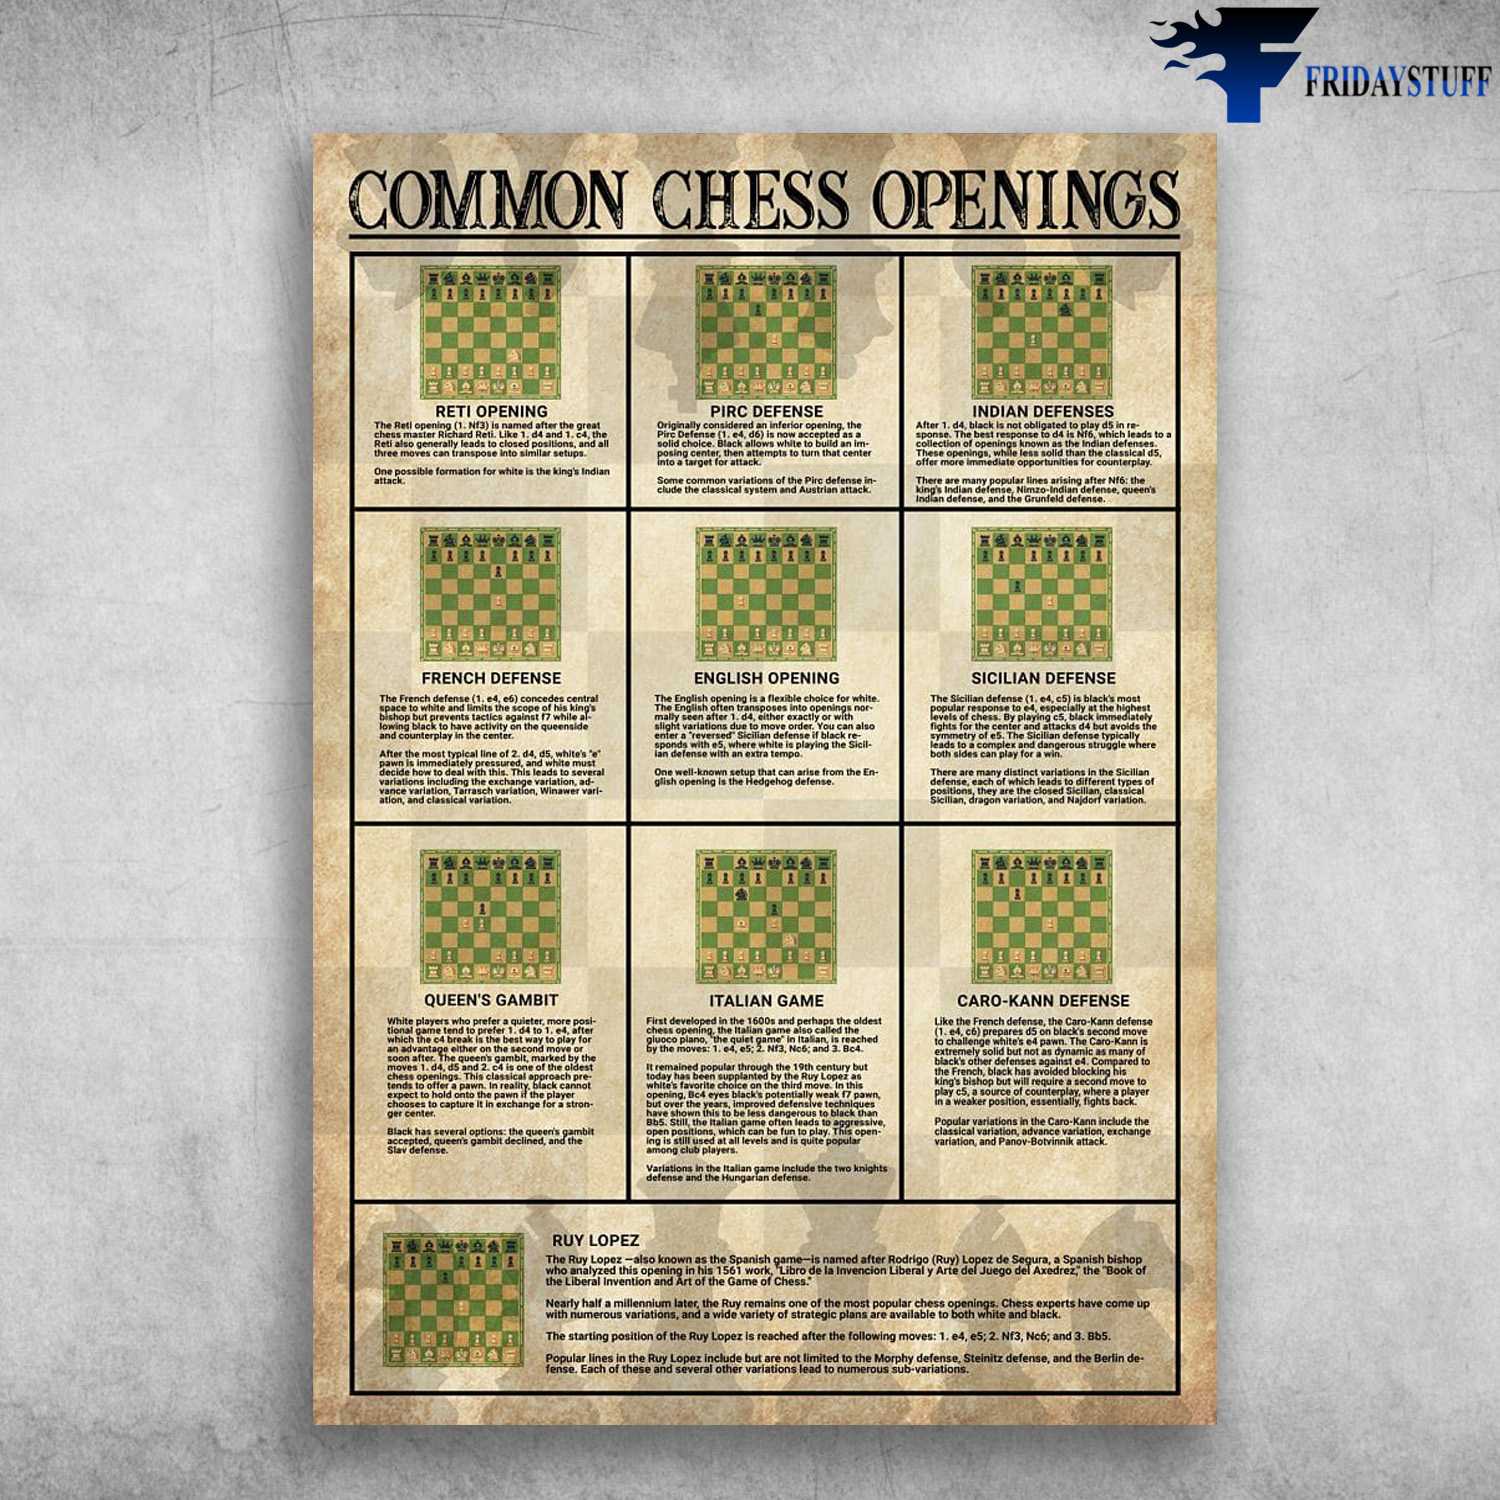 Chess - Chess is the Art of Analysis Poster by NoPlanB